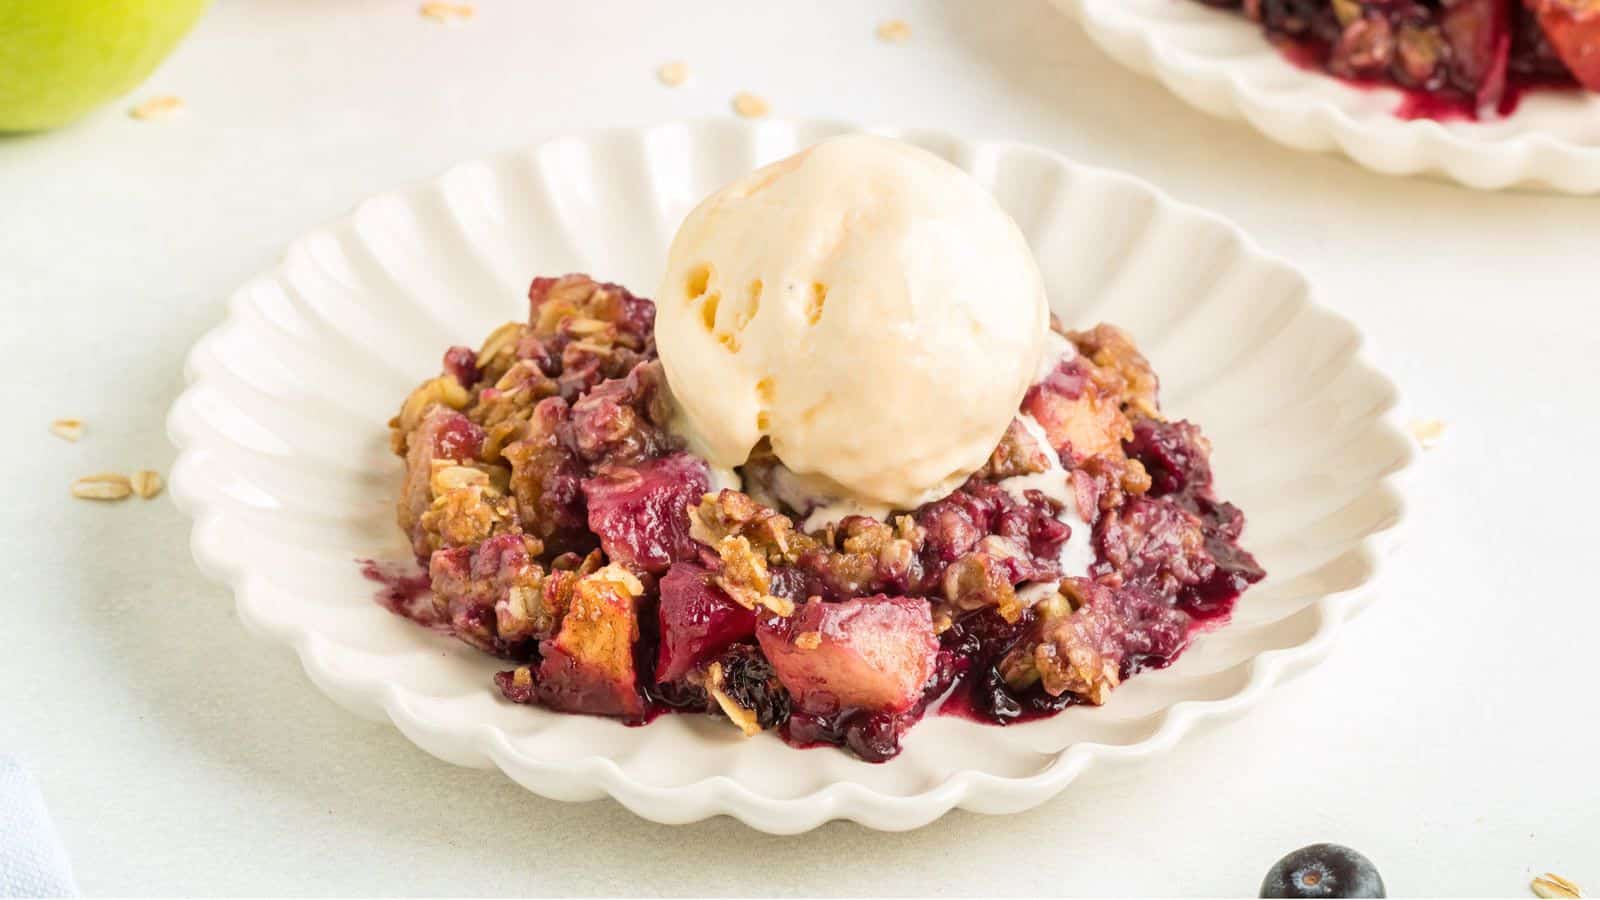 Apple and blueberry crumble on a white ribbed plate with a scoop of vanilla ice cream on top.